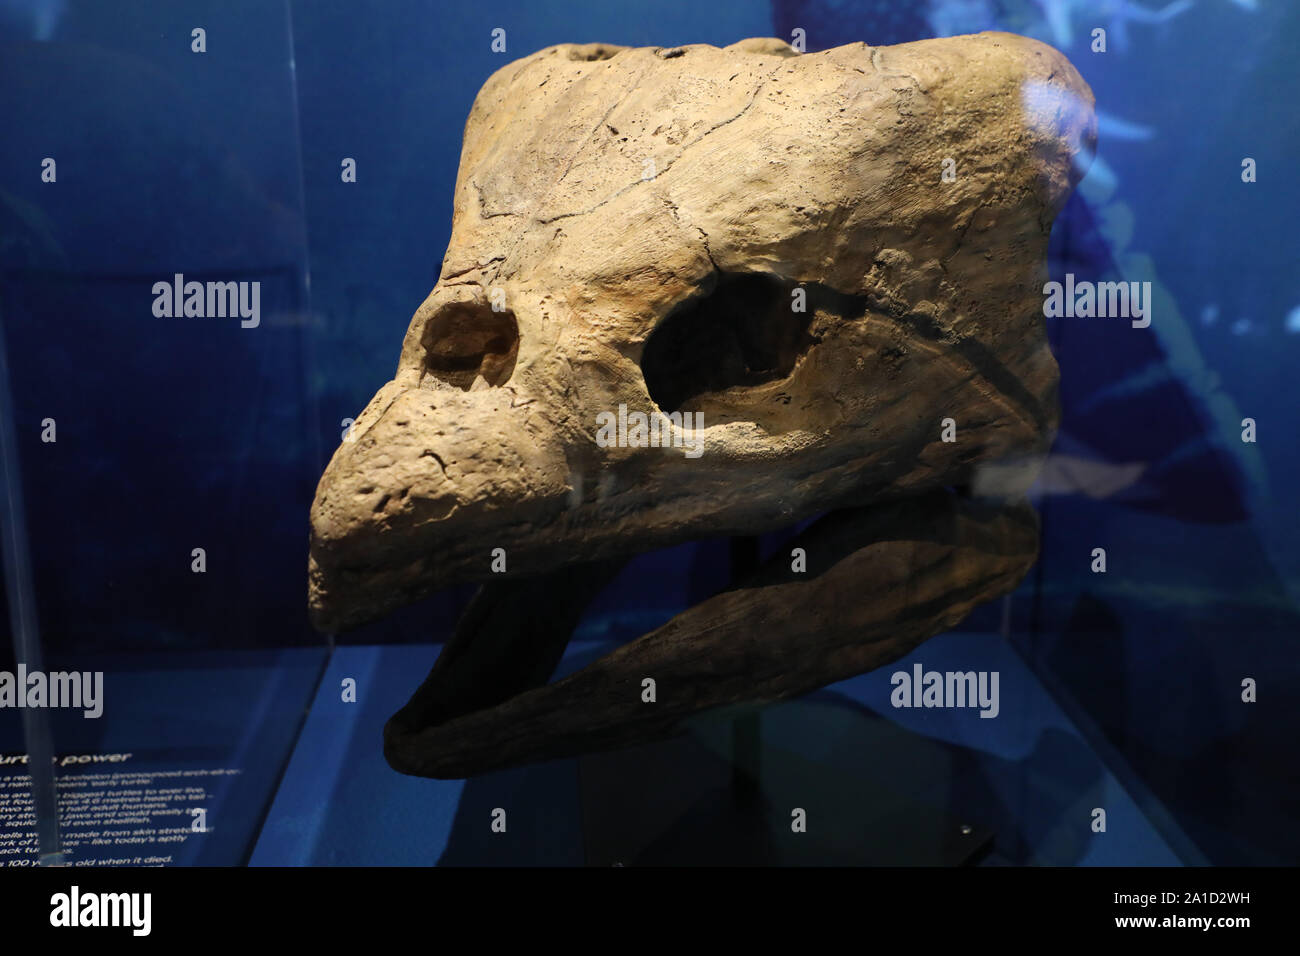 Sydney, Australia. 26th September 2019. Sea Monsters: Prehistoric Ocean Predators opens to the public on Thursday 26 September and brings together never-before-seen real fossils from millions of years ago, gigantic life-sized casts from real specimens, immersive multimedia and hands on interactives. Pictured: a replica Archelon (early turtle) skull. Credit: Richard Milnes/Alamy Credit: Richard Milnes/Alamy Live News Stock Photo